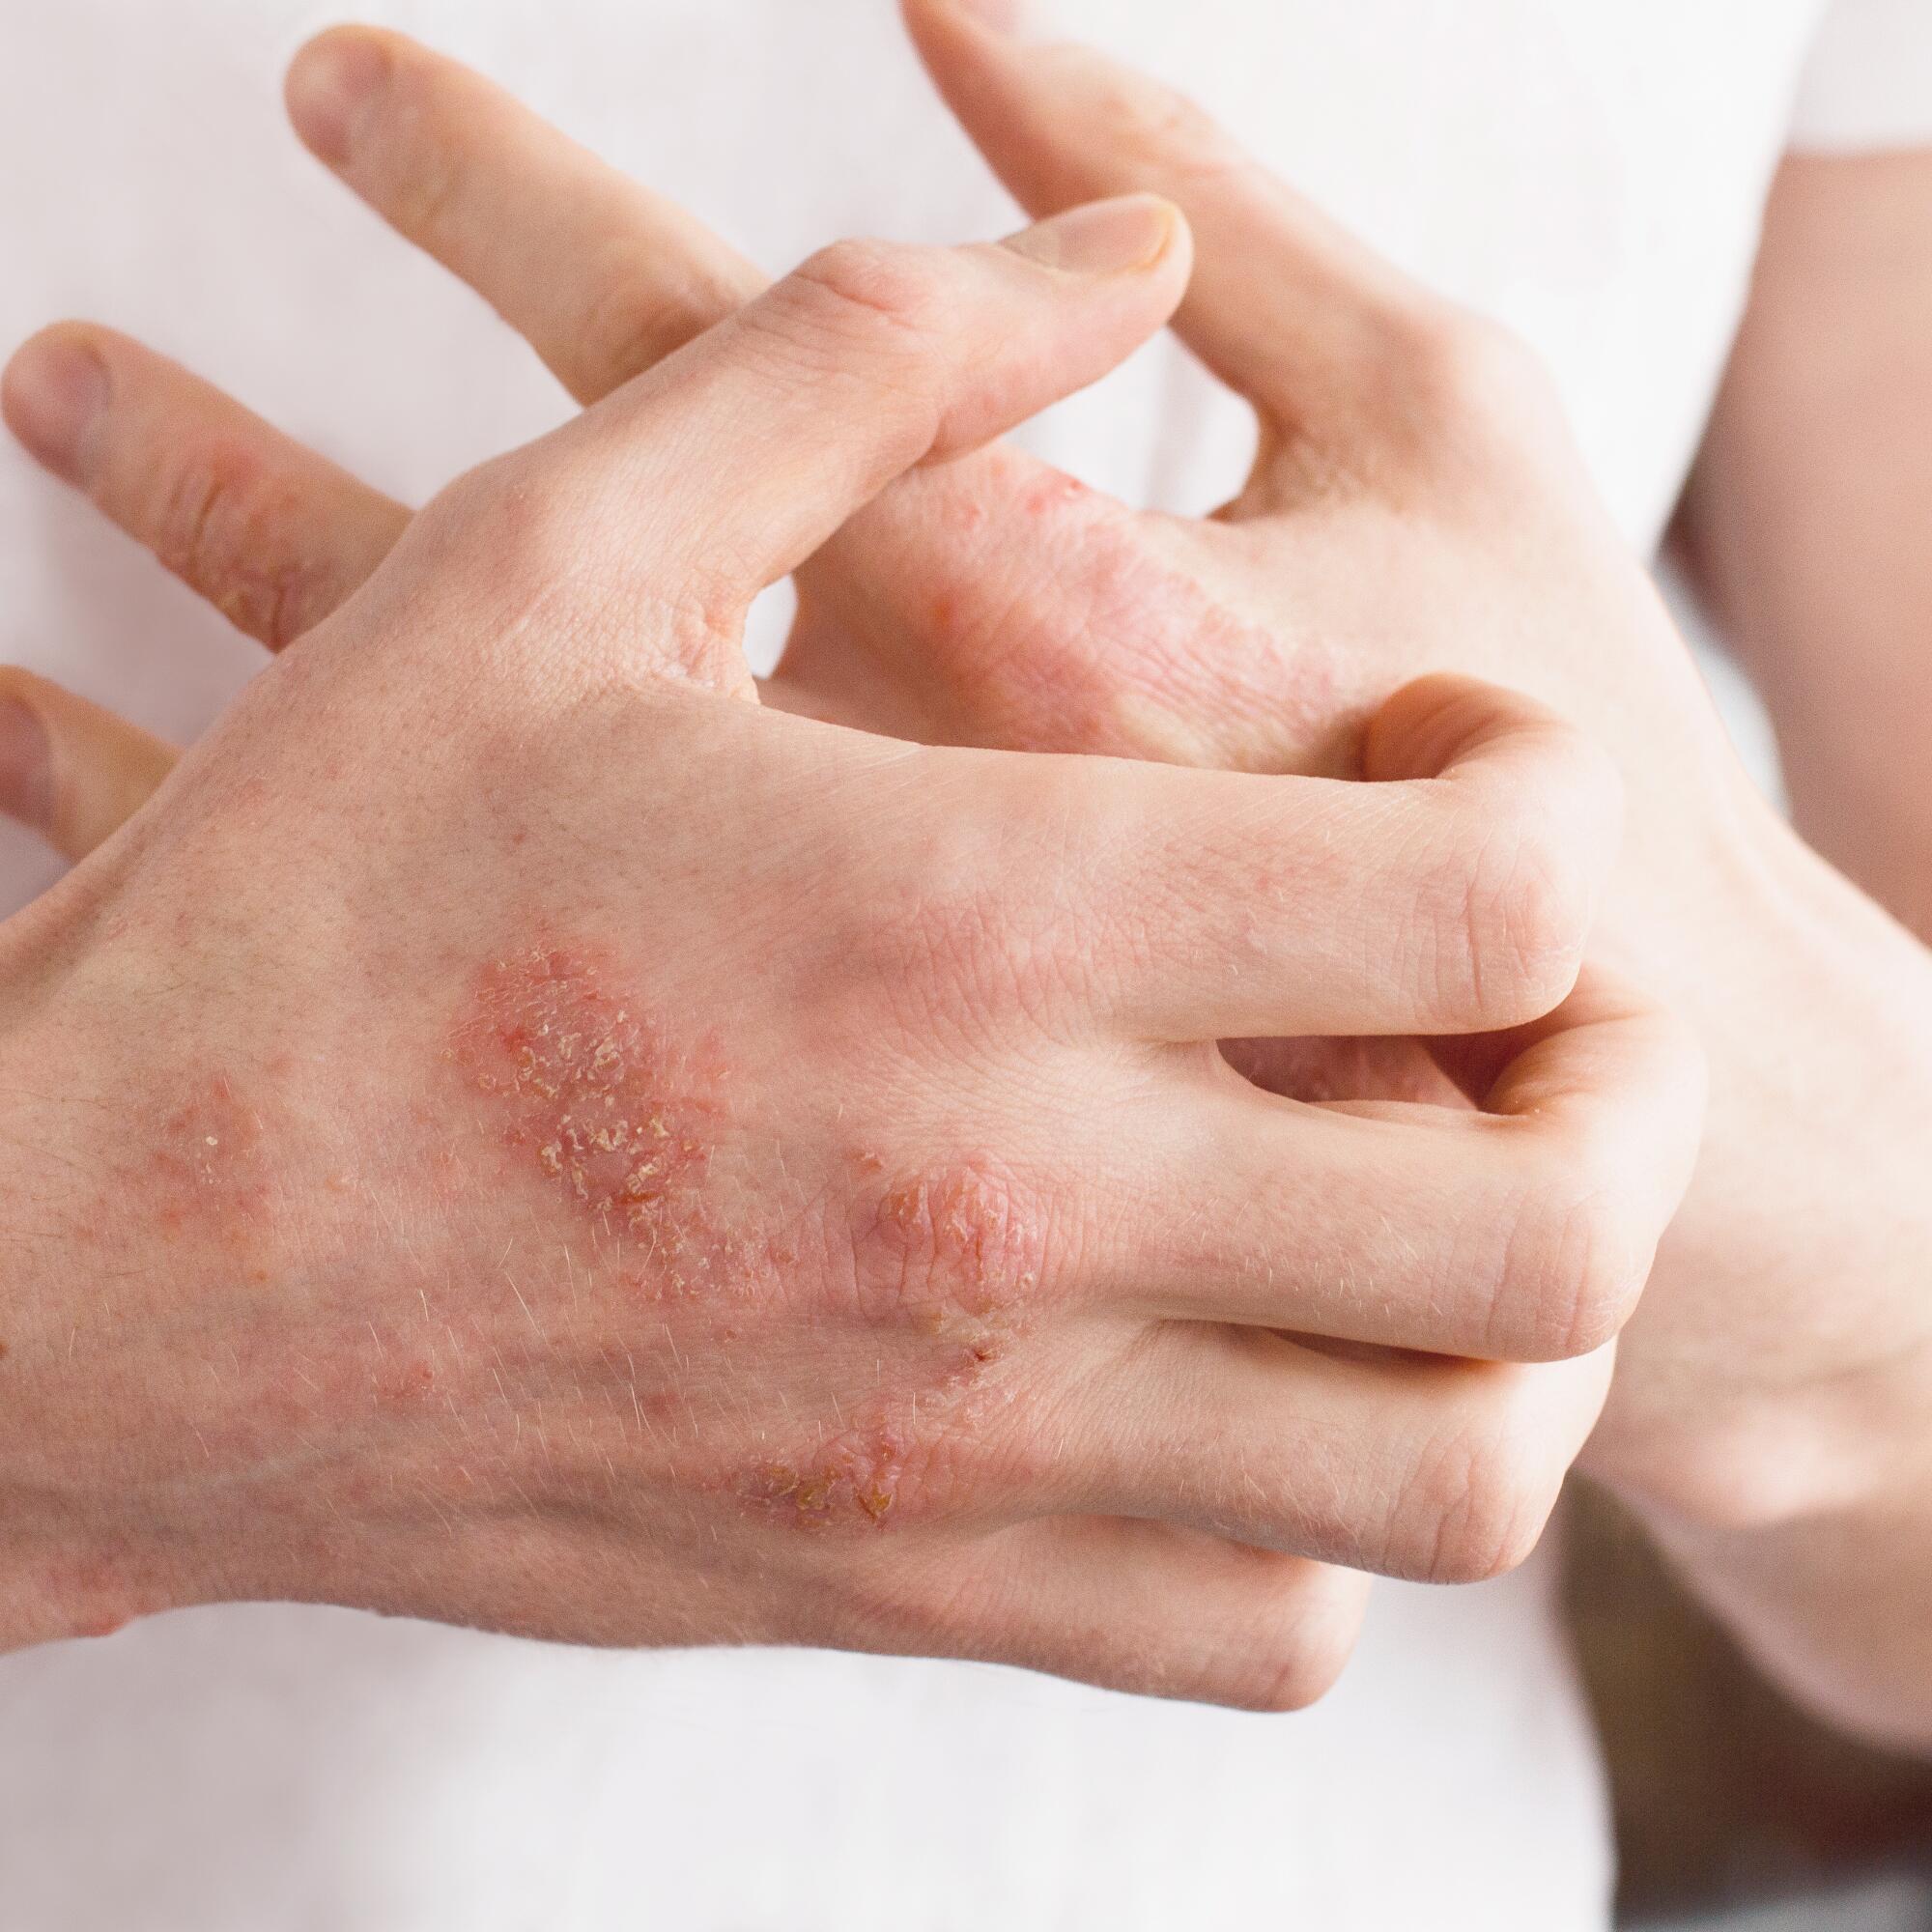 Eczema of hands and feet